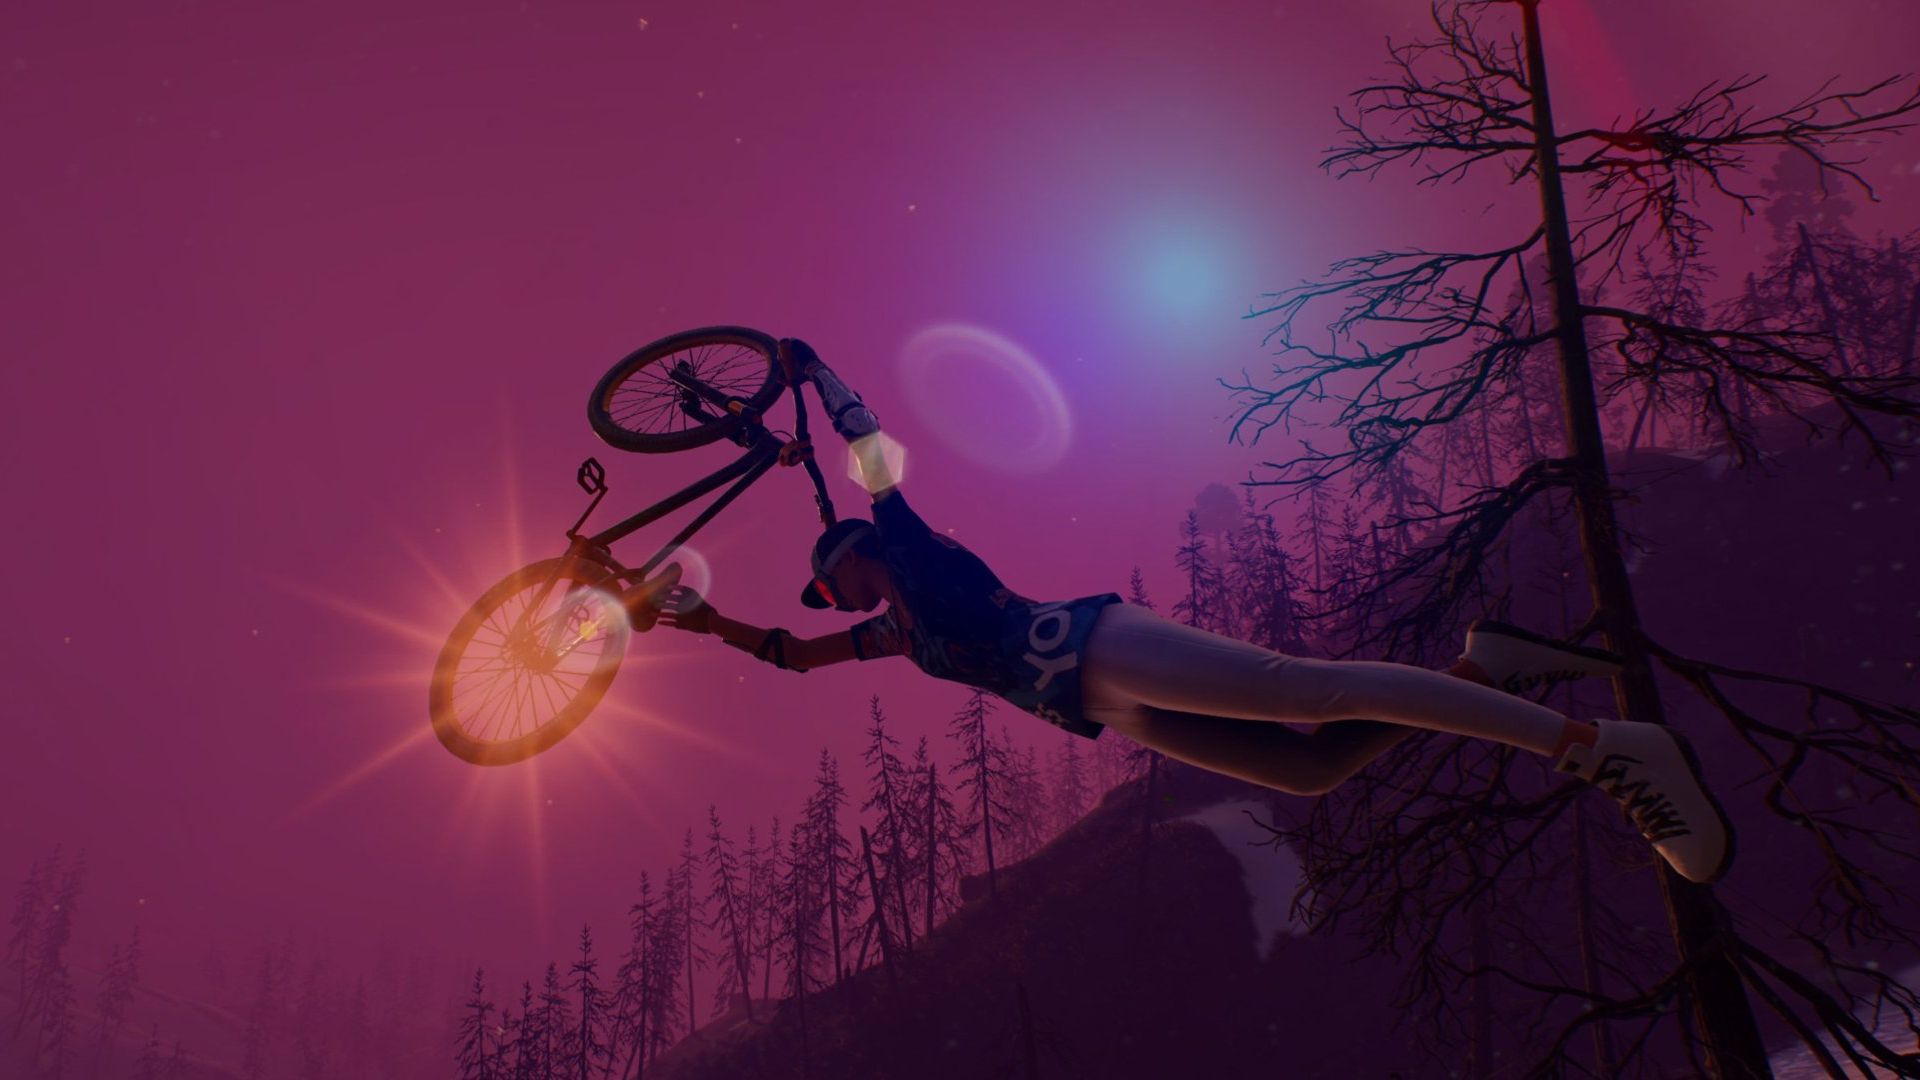 Video game screenshot of a dirt-bike and its rider in mid-air in front of a purple sky